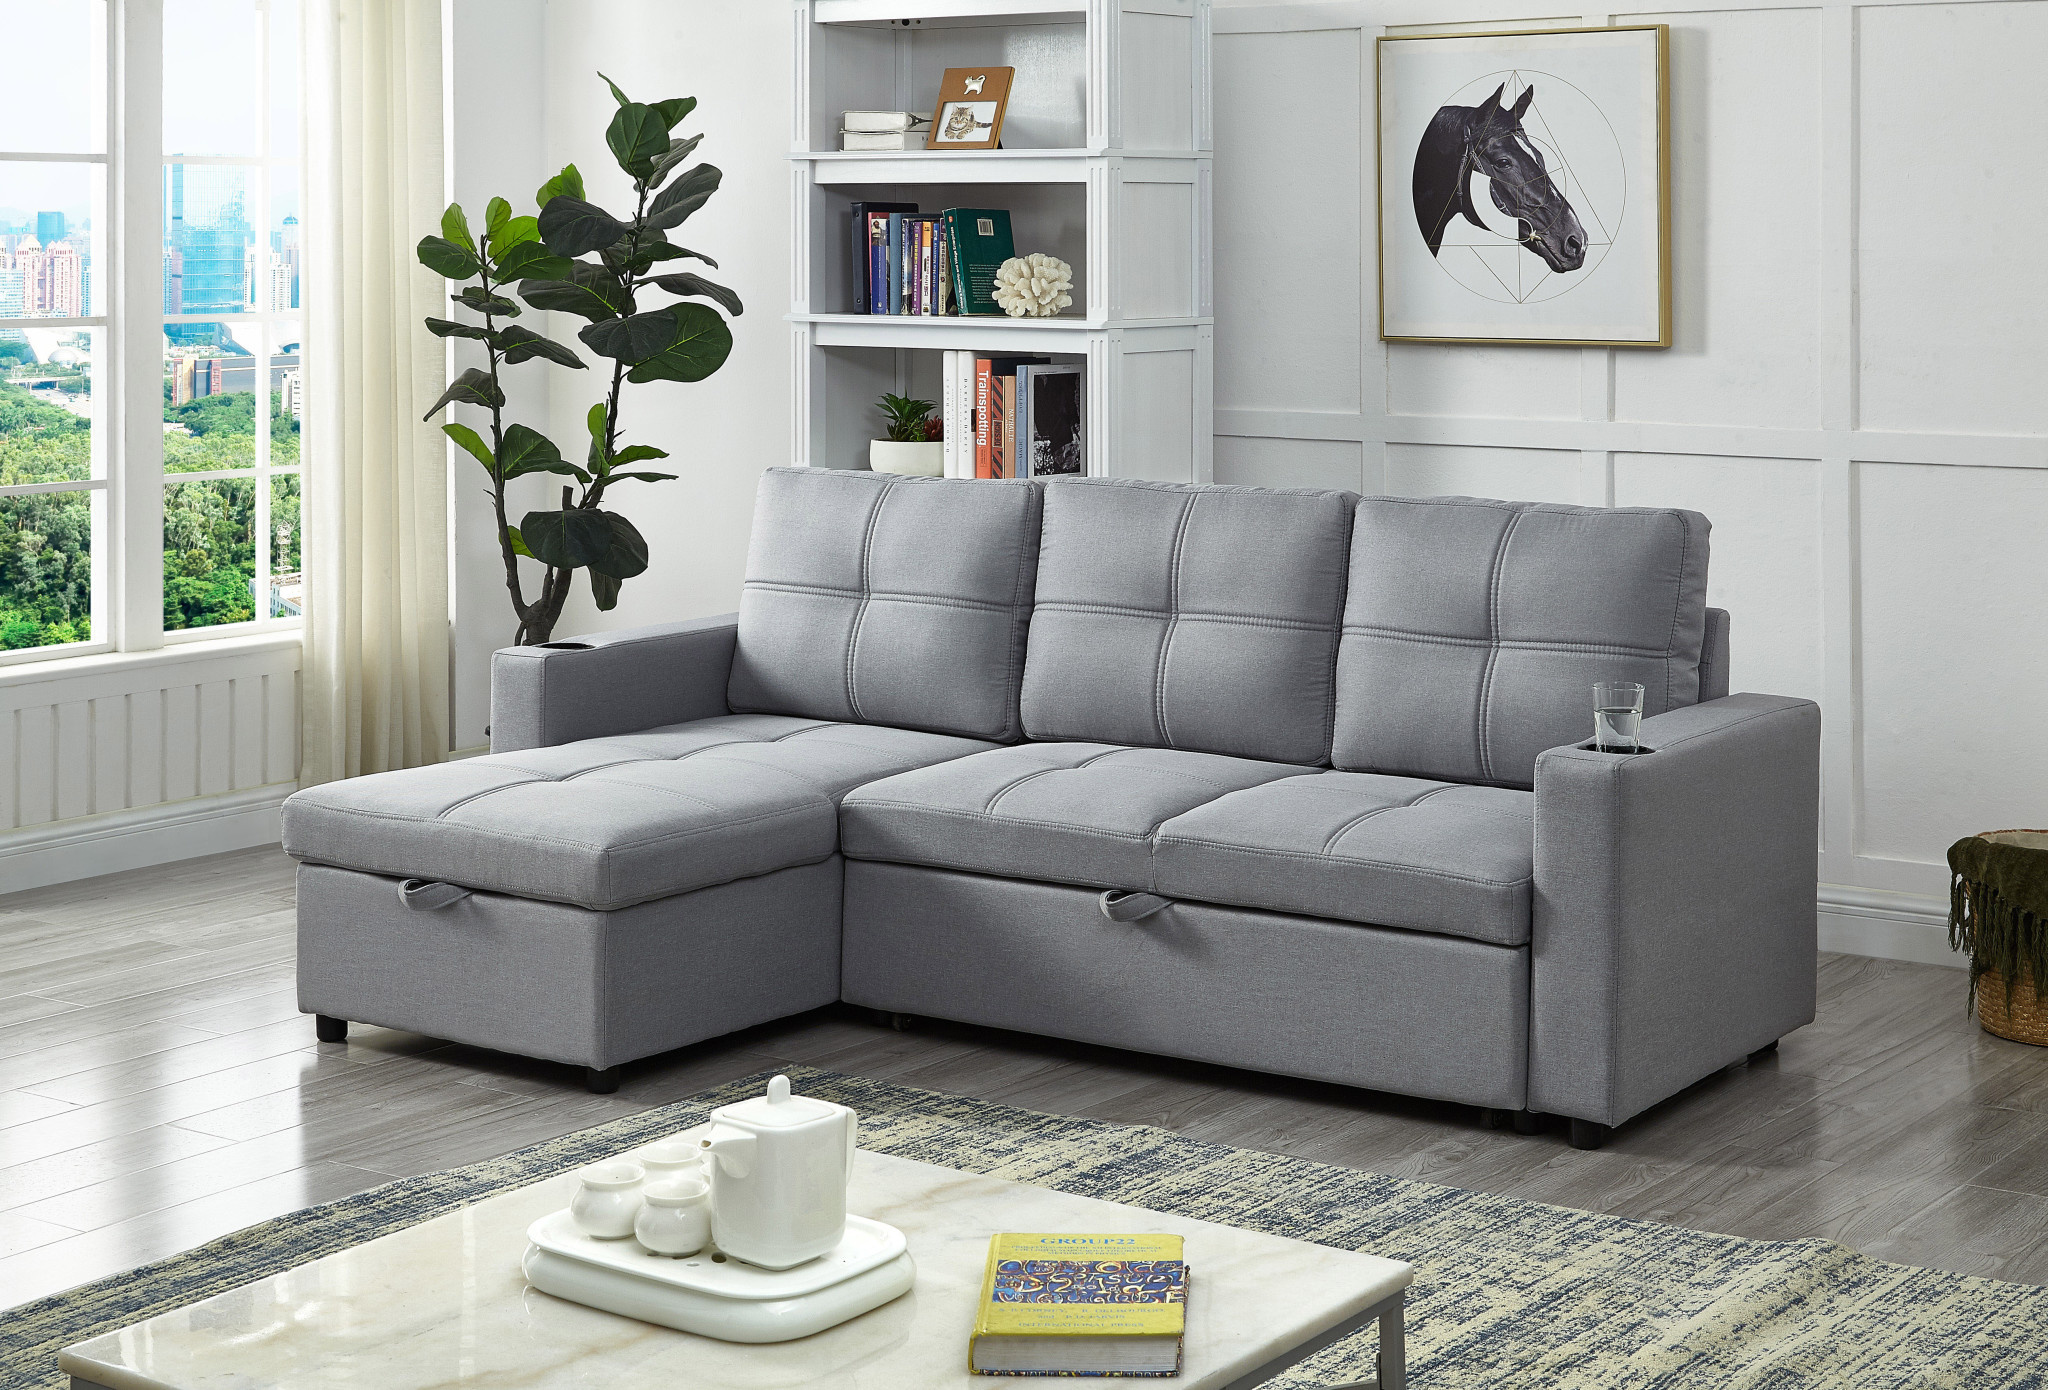 commercial sectional sofa bed